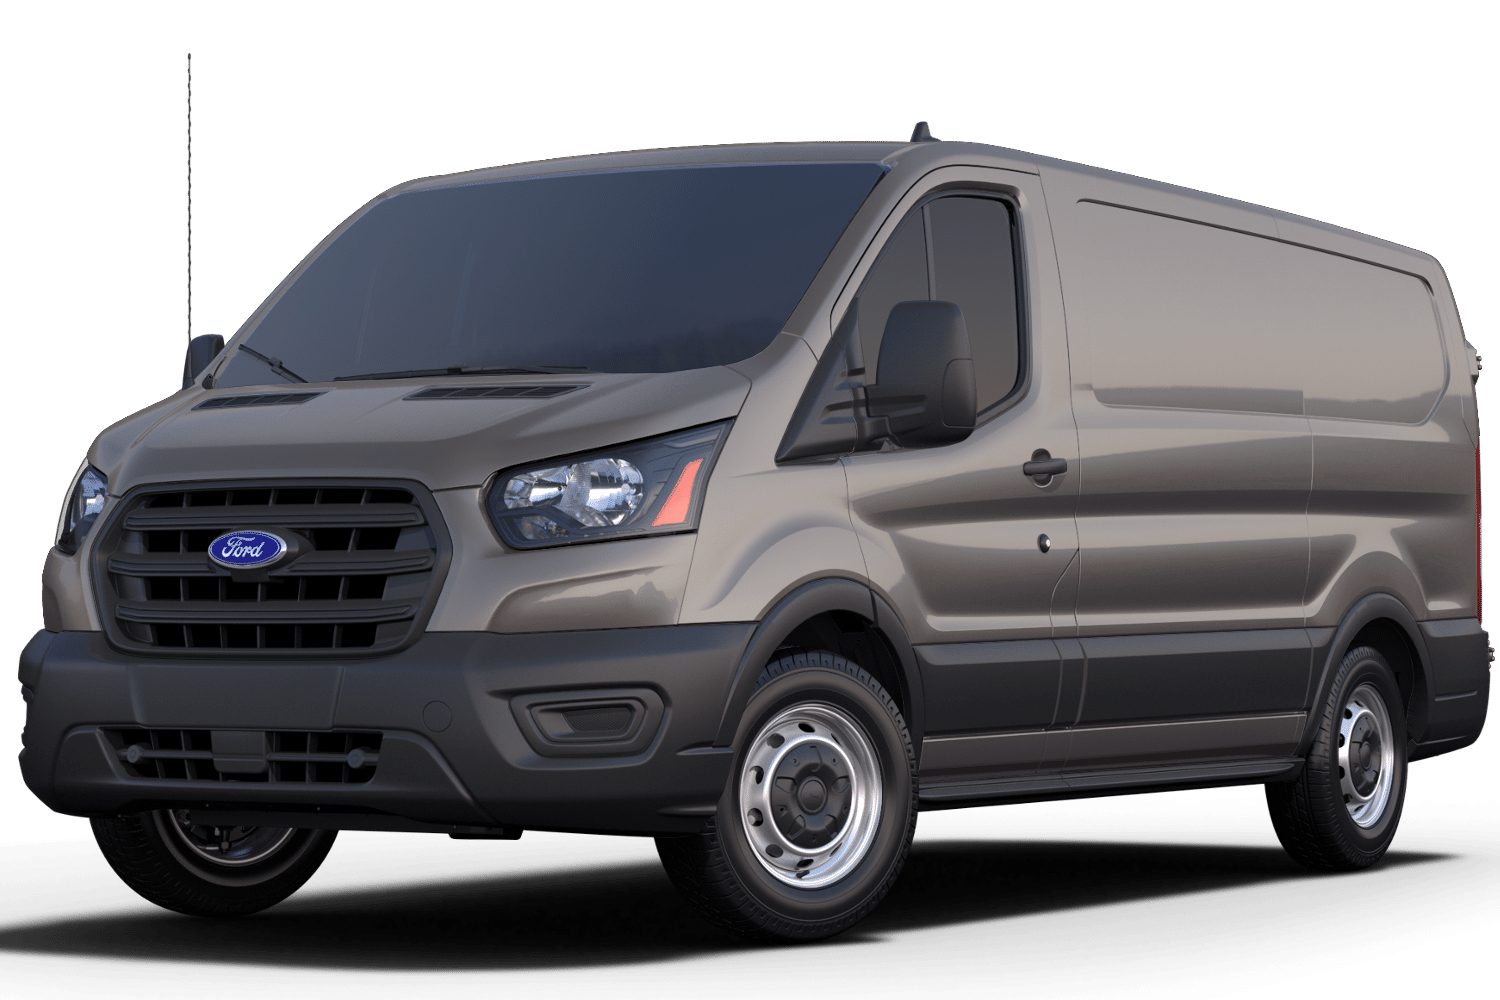 2020 Ford Transit Gets New Diffused 